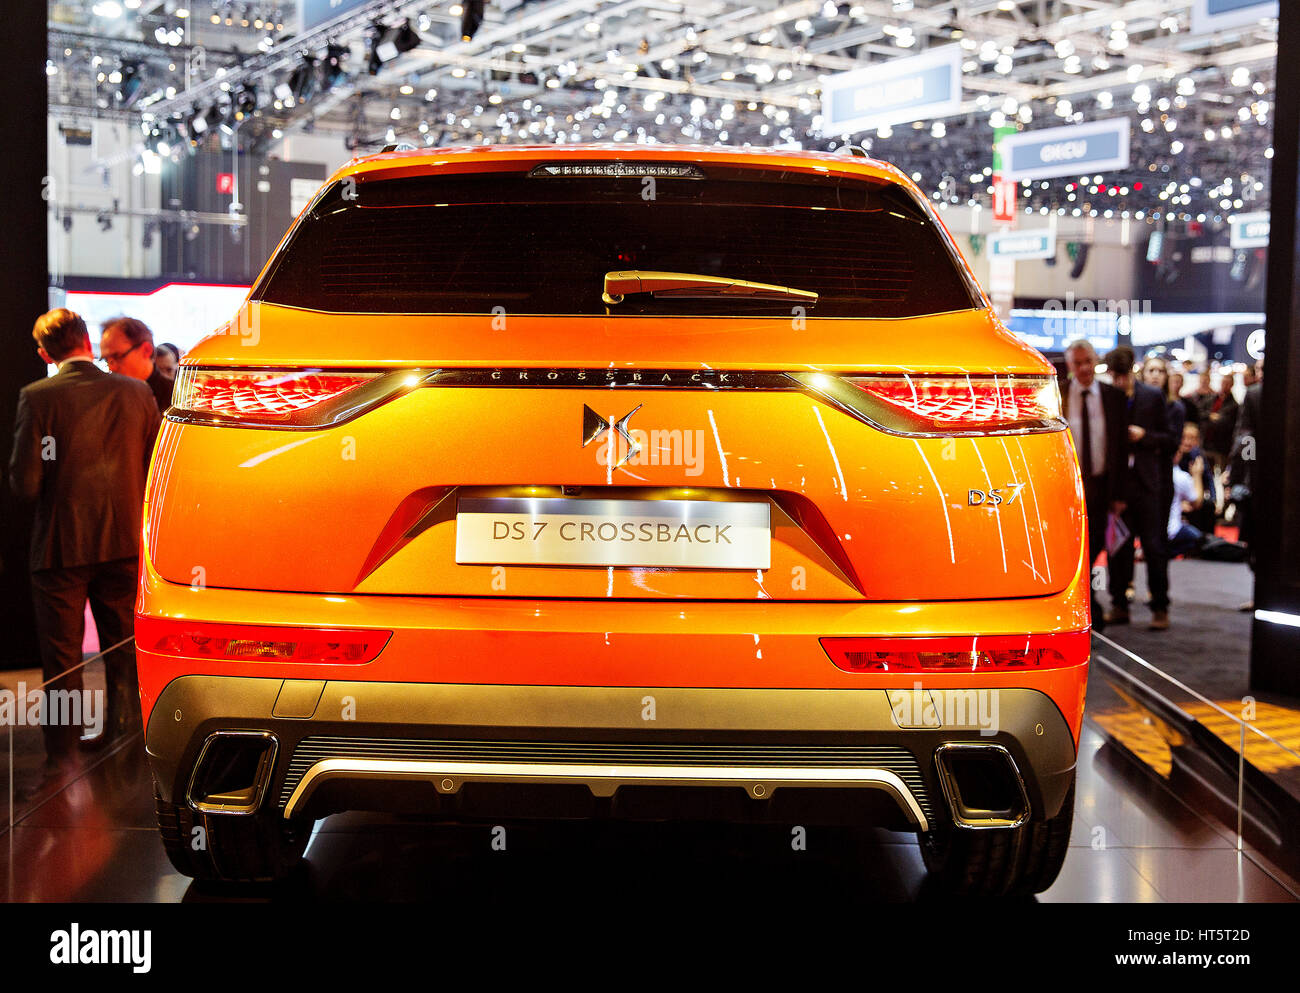 File:DS 7 Crossback 1X7A6083.jpg - Wikimedia Commons